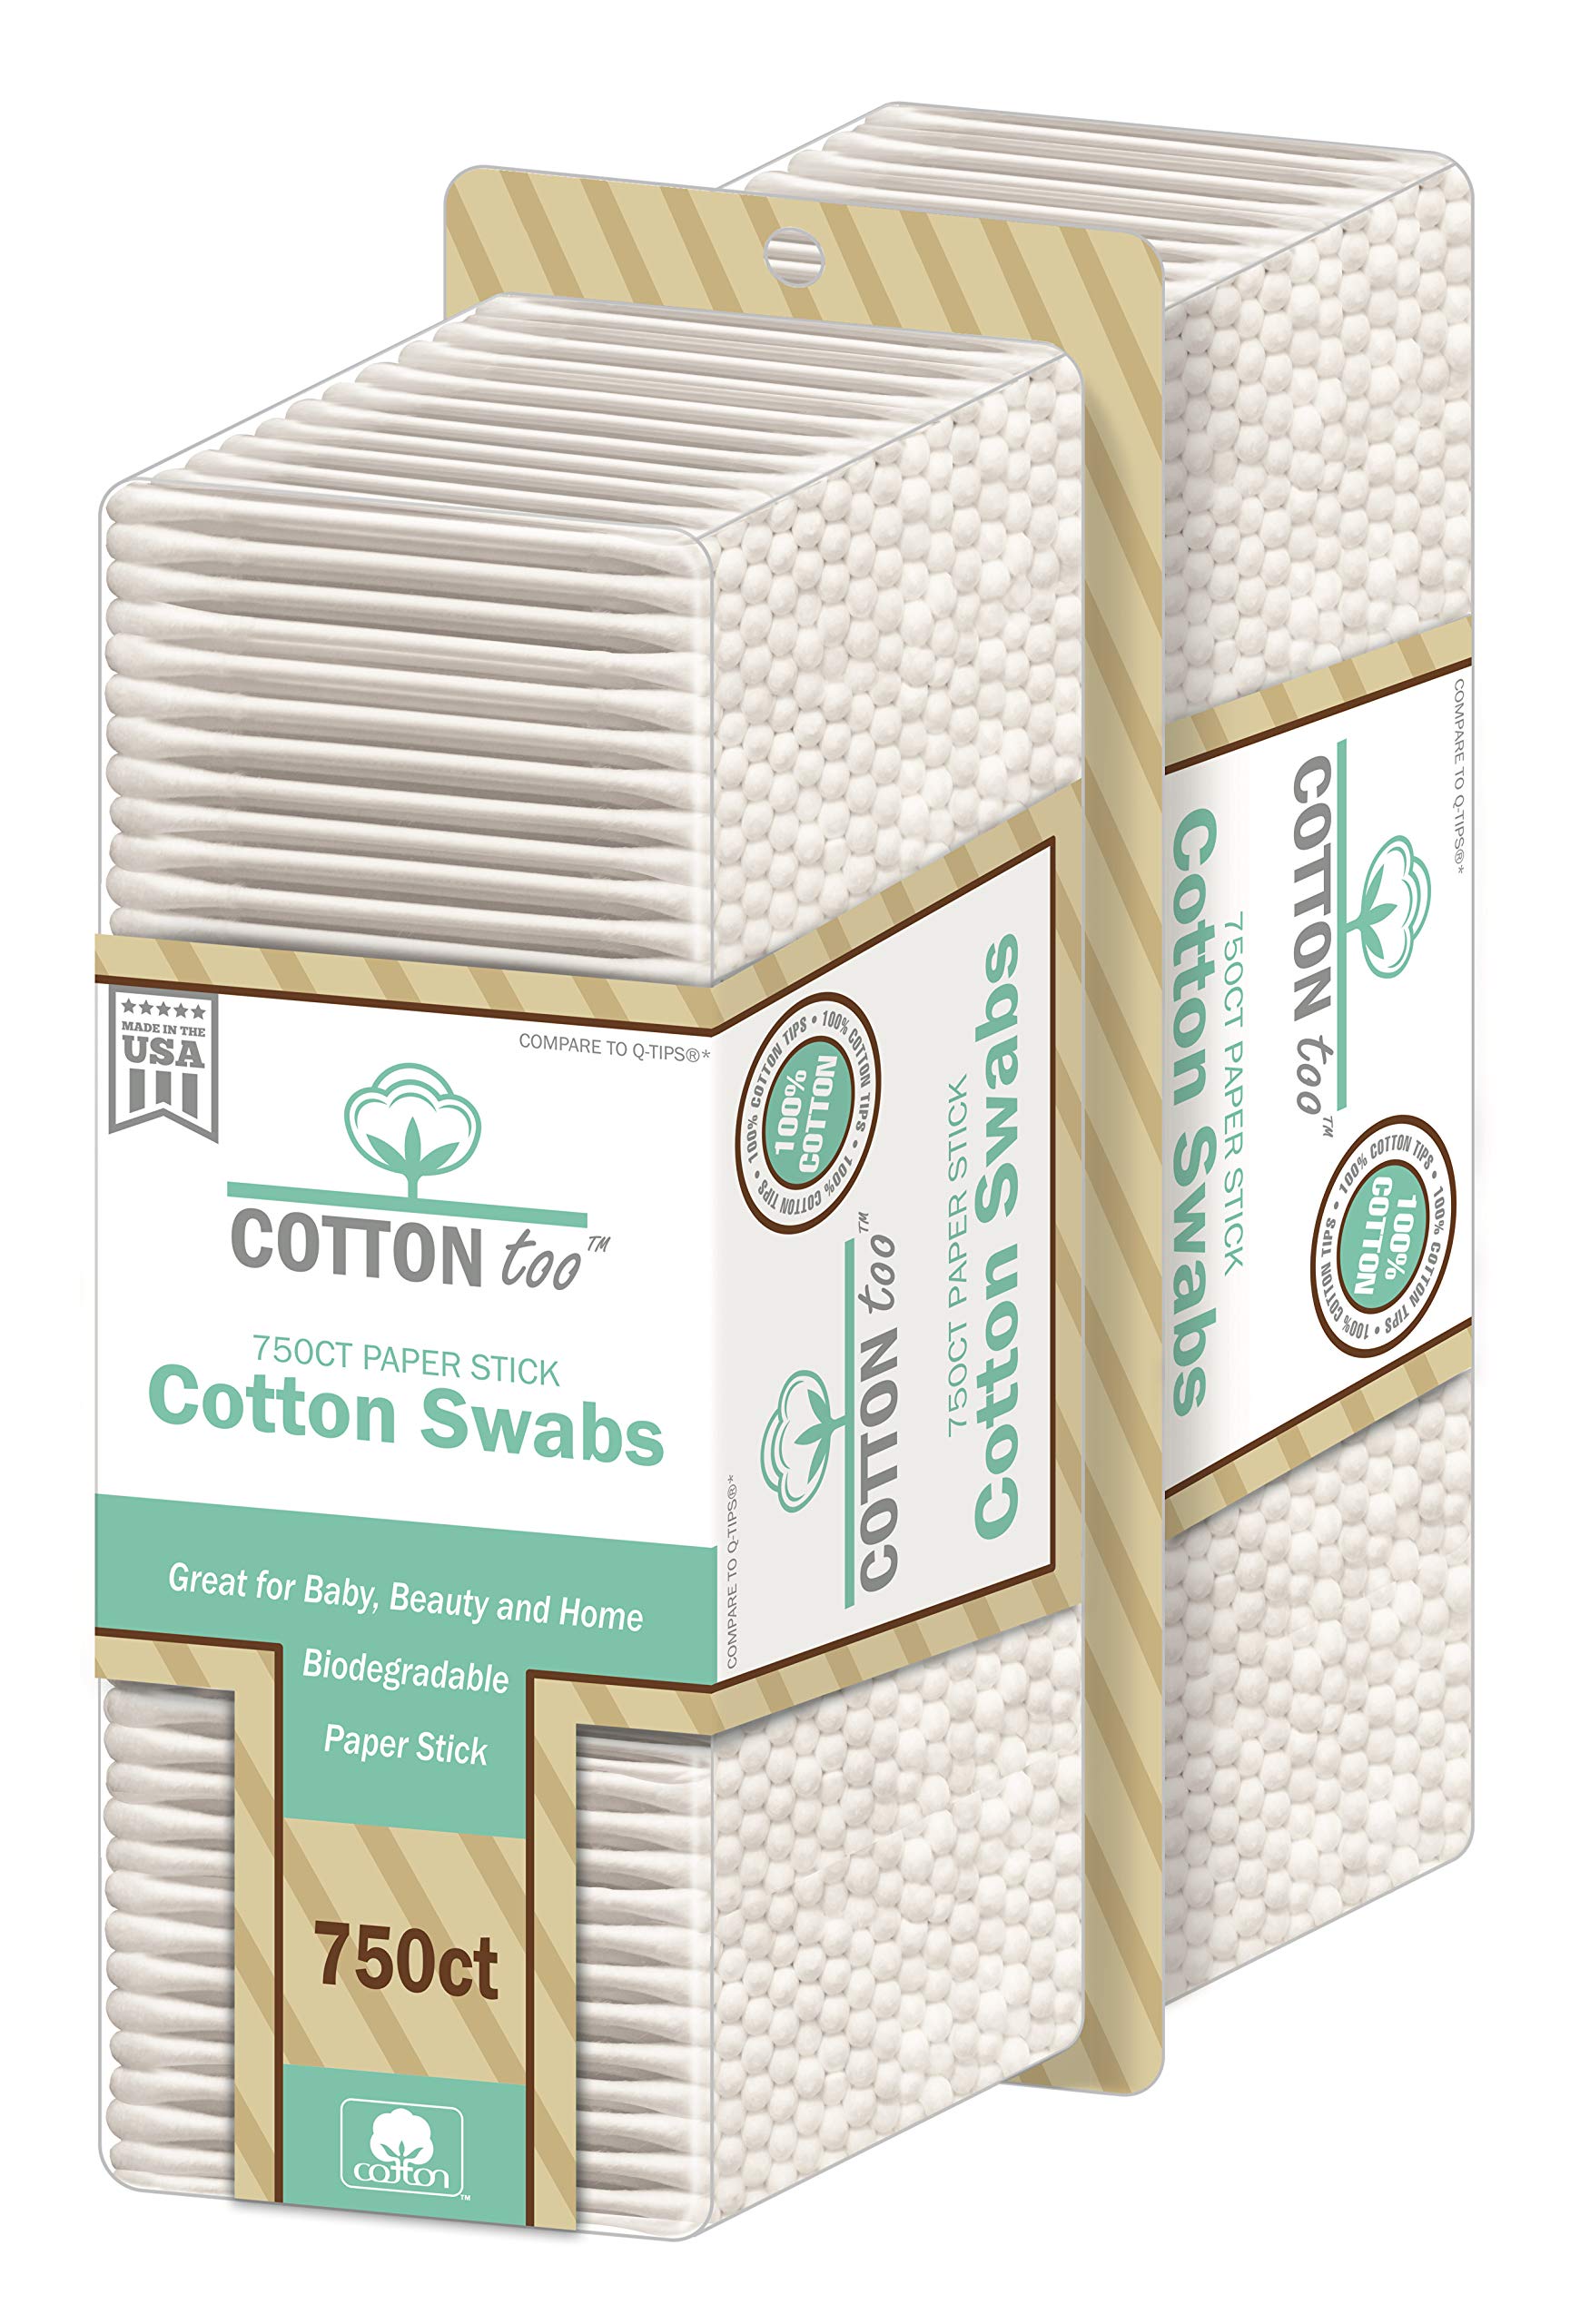 Cotton Too 750 Count Cotton Swabs With White Paper Stick, 2 Pack